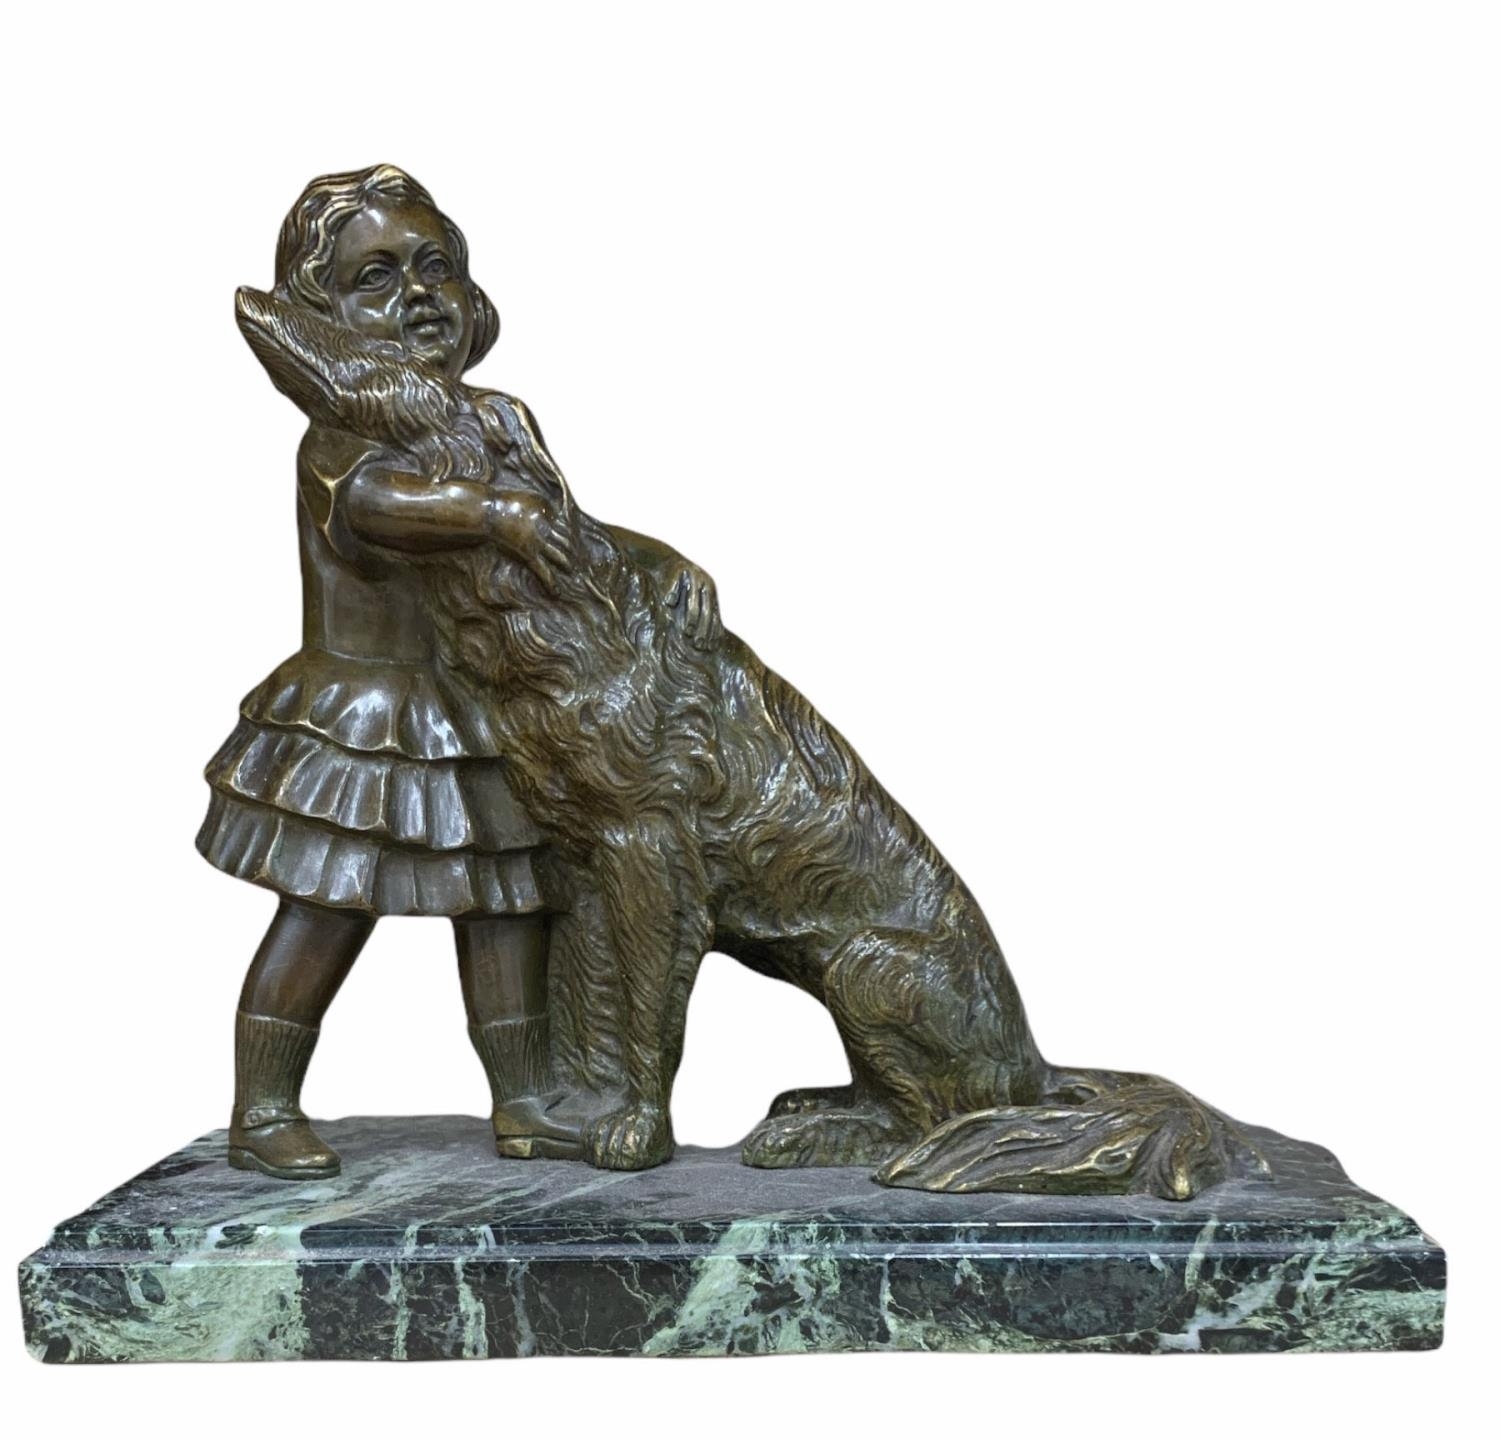 J. FOES, BRONZE FIGURE, GIRL STANDING WITH DOG Raised on a marble plinth base, signed. (h 28cm x d